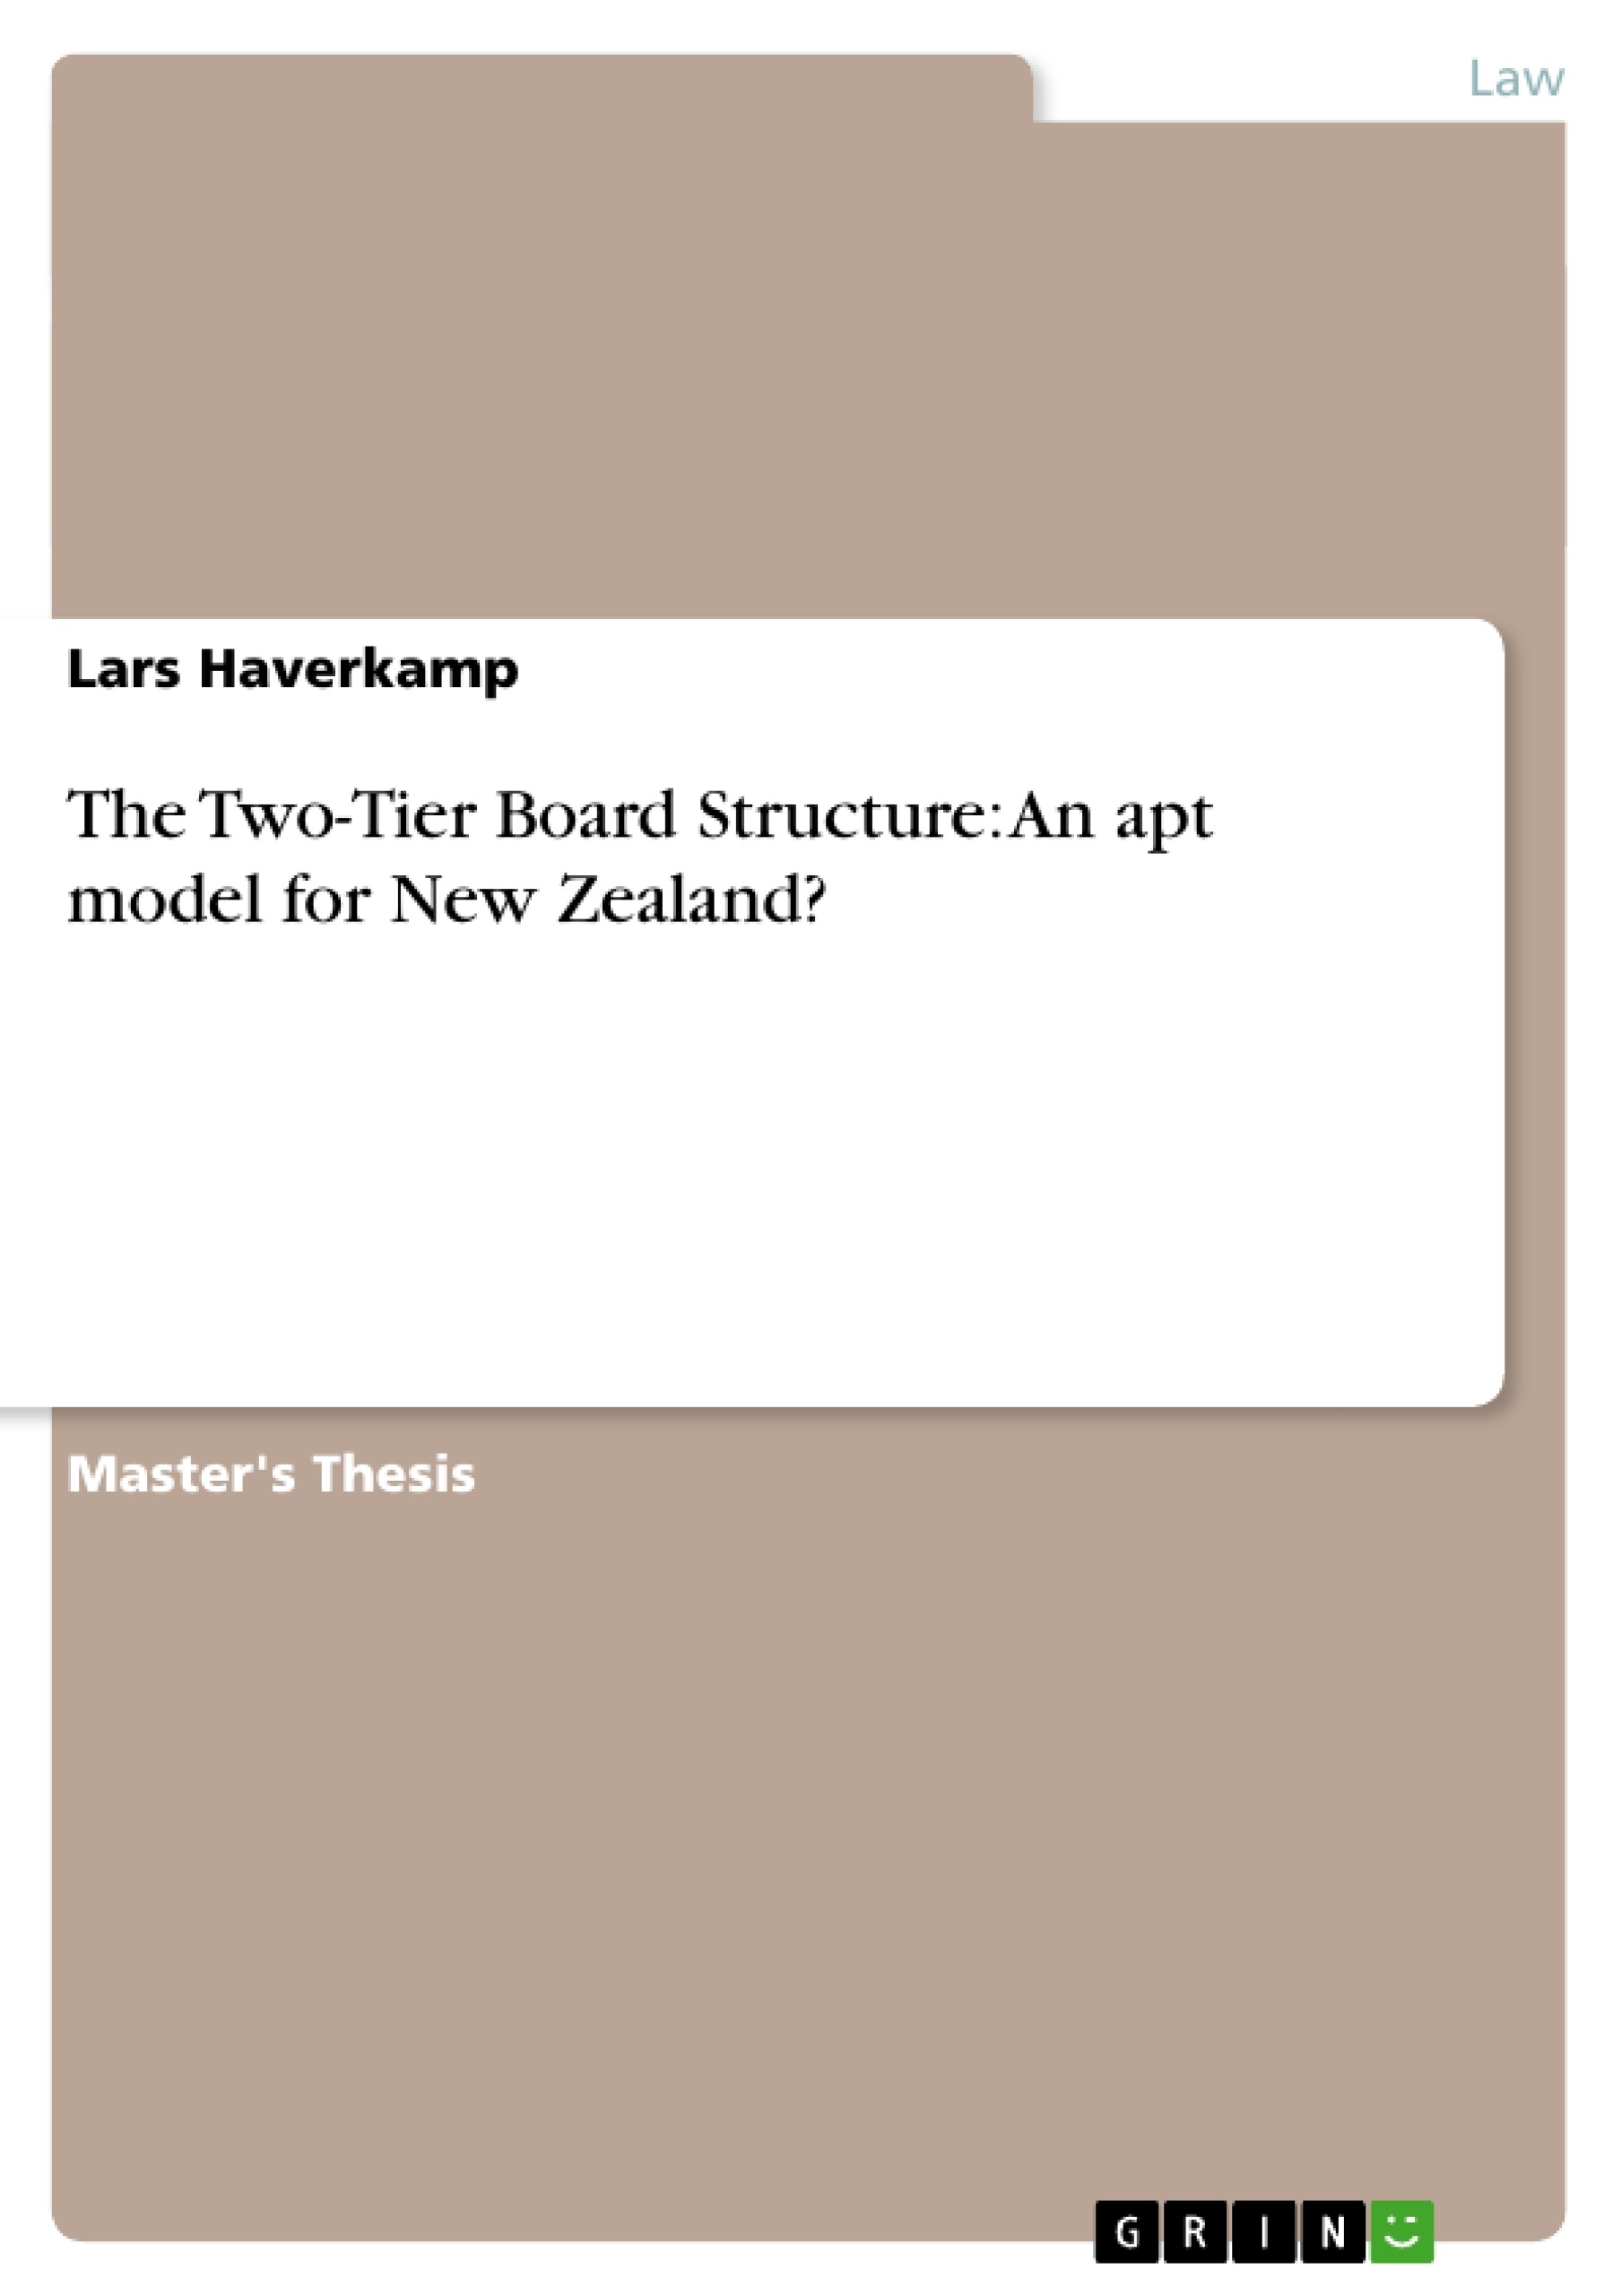 Titel: The Two-Tier Board Structure: An apt model for New Zealand?